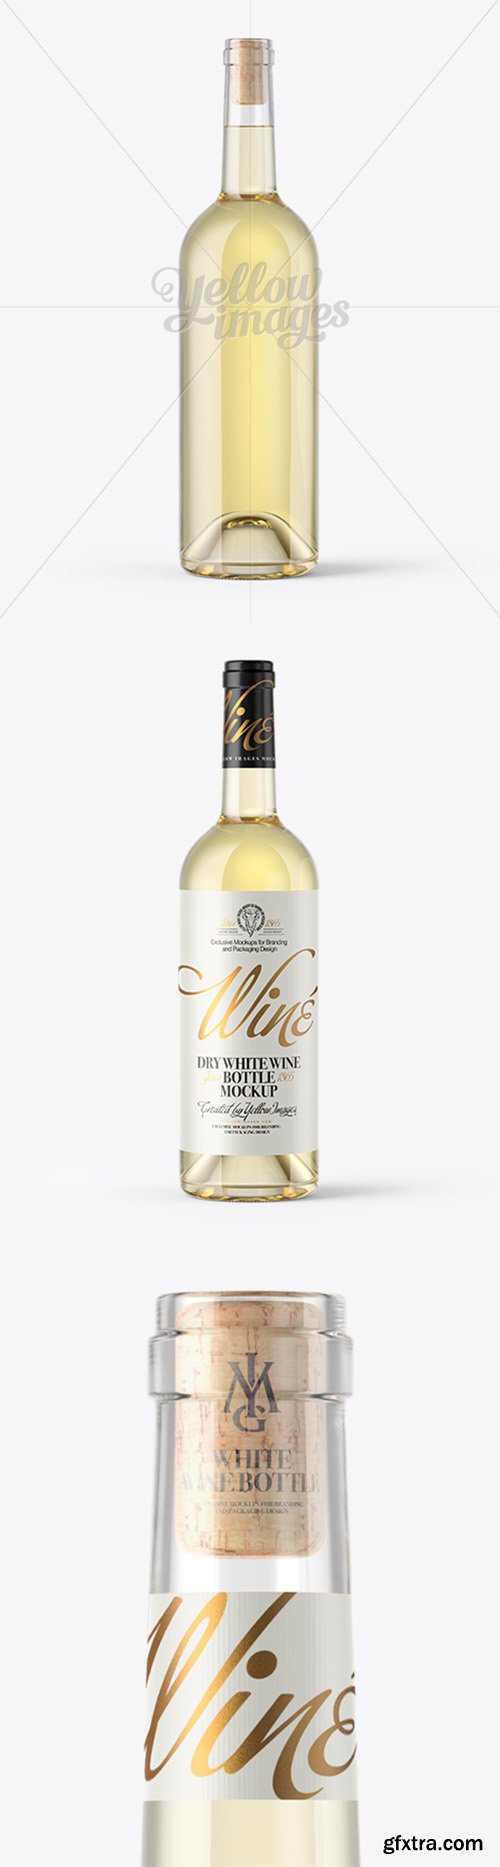 Clear Glass White Wine Bottle With Cork Mockup 16917